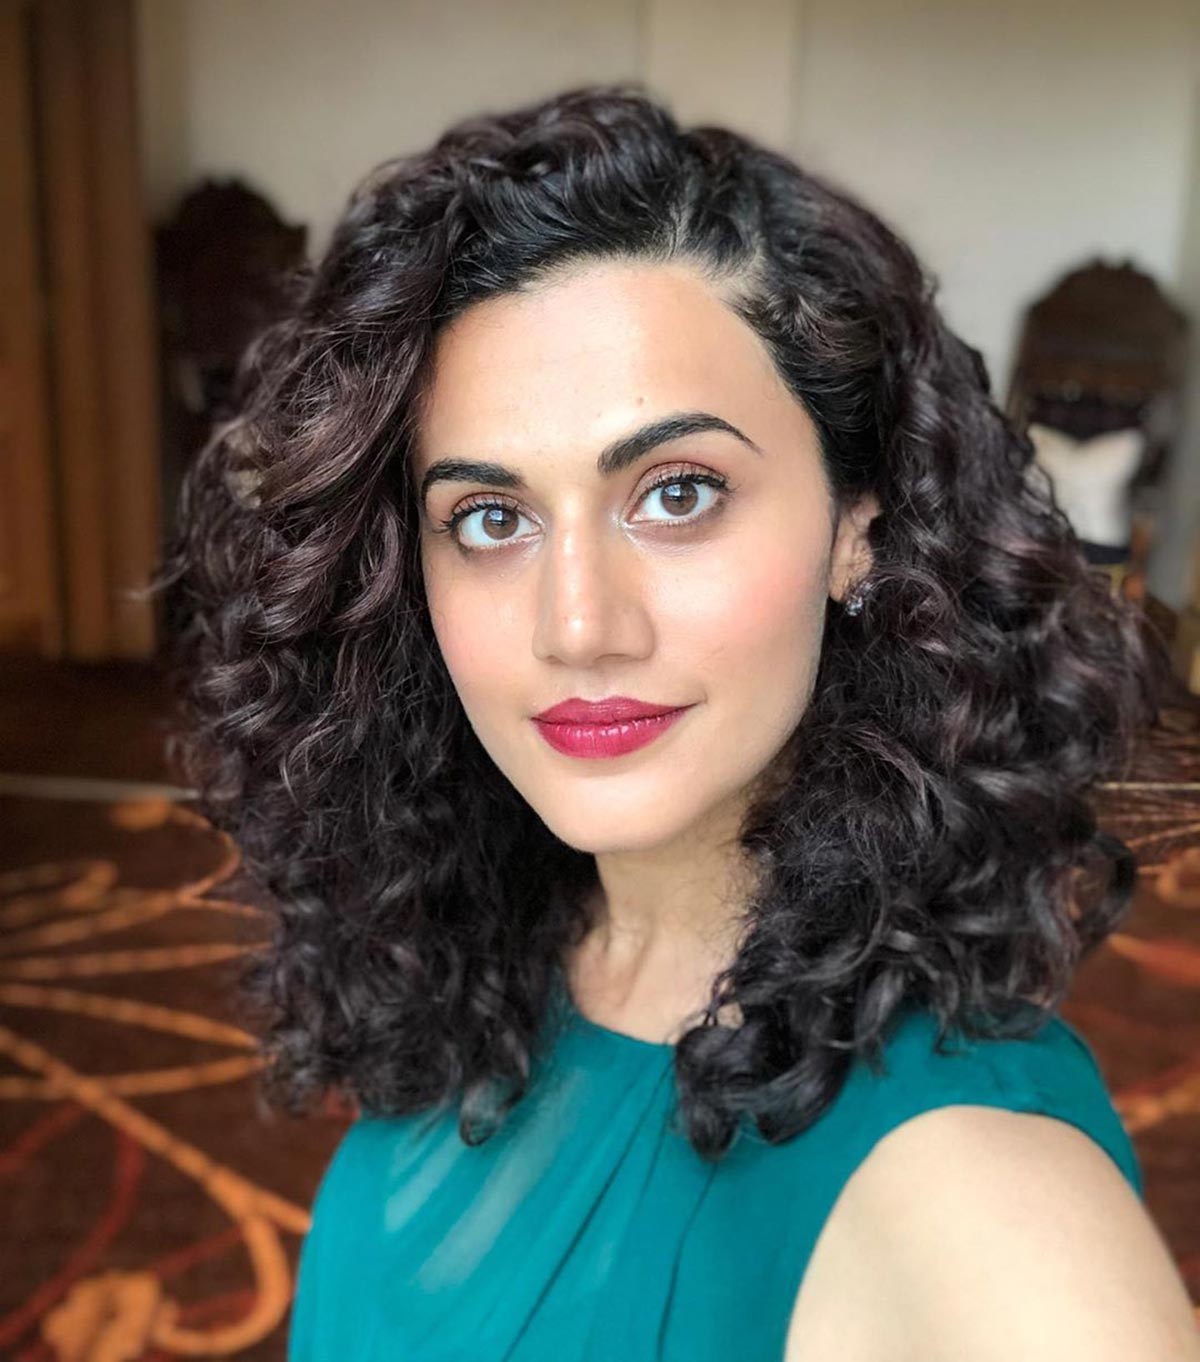 ASK DR JAIN: How do I make my curly hair straight?